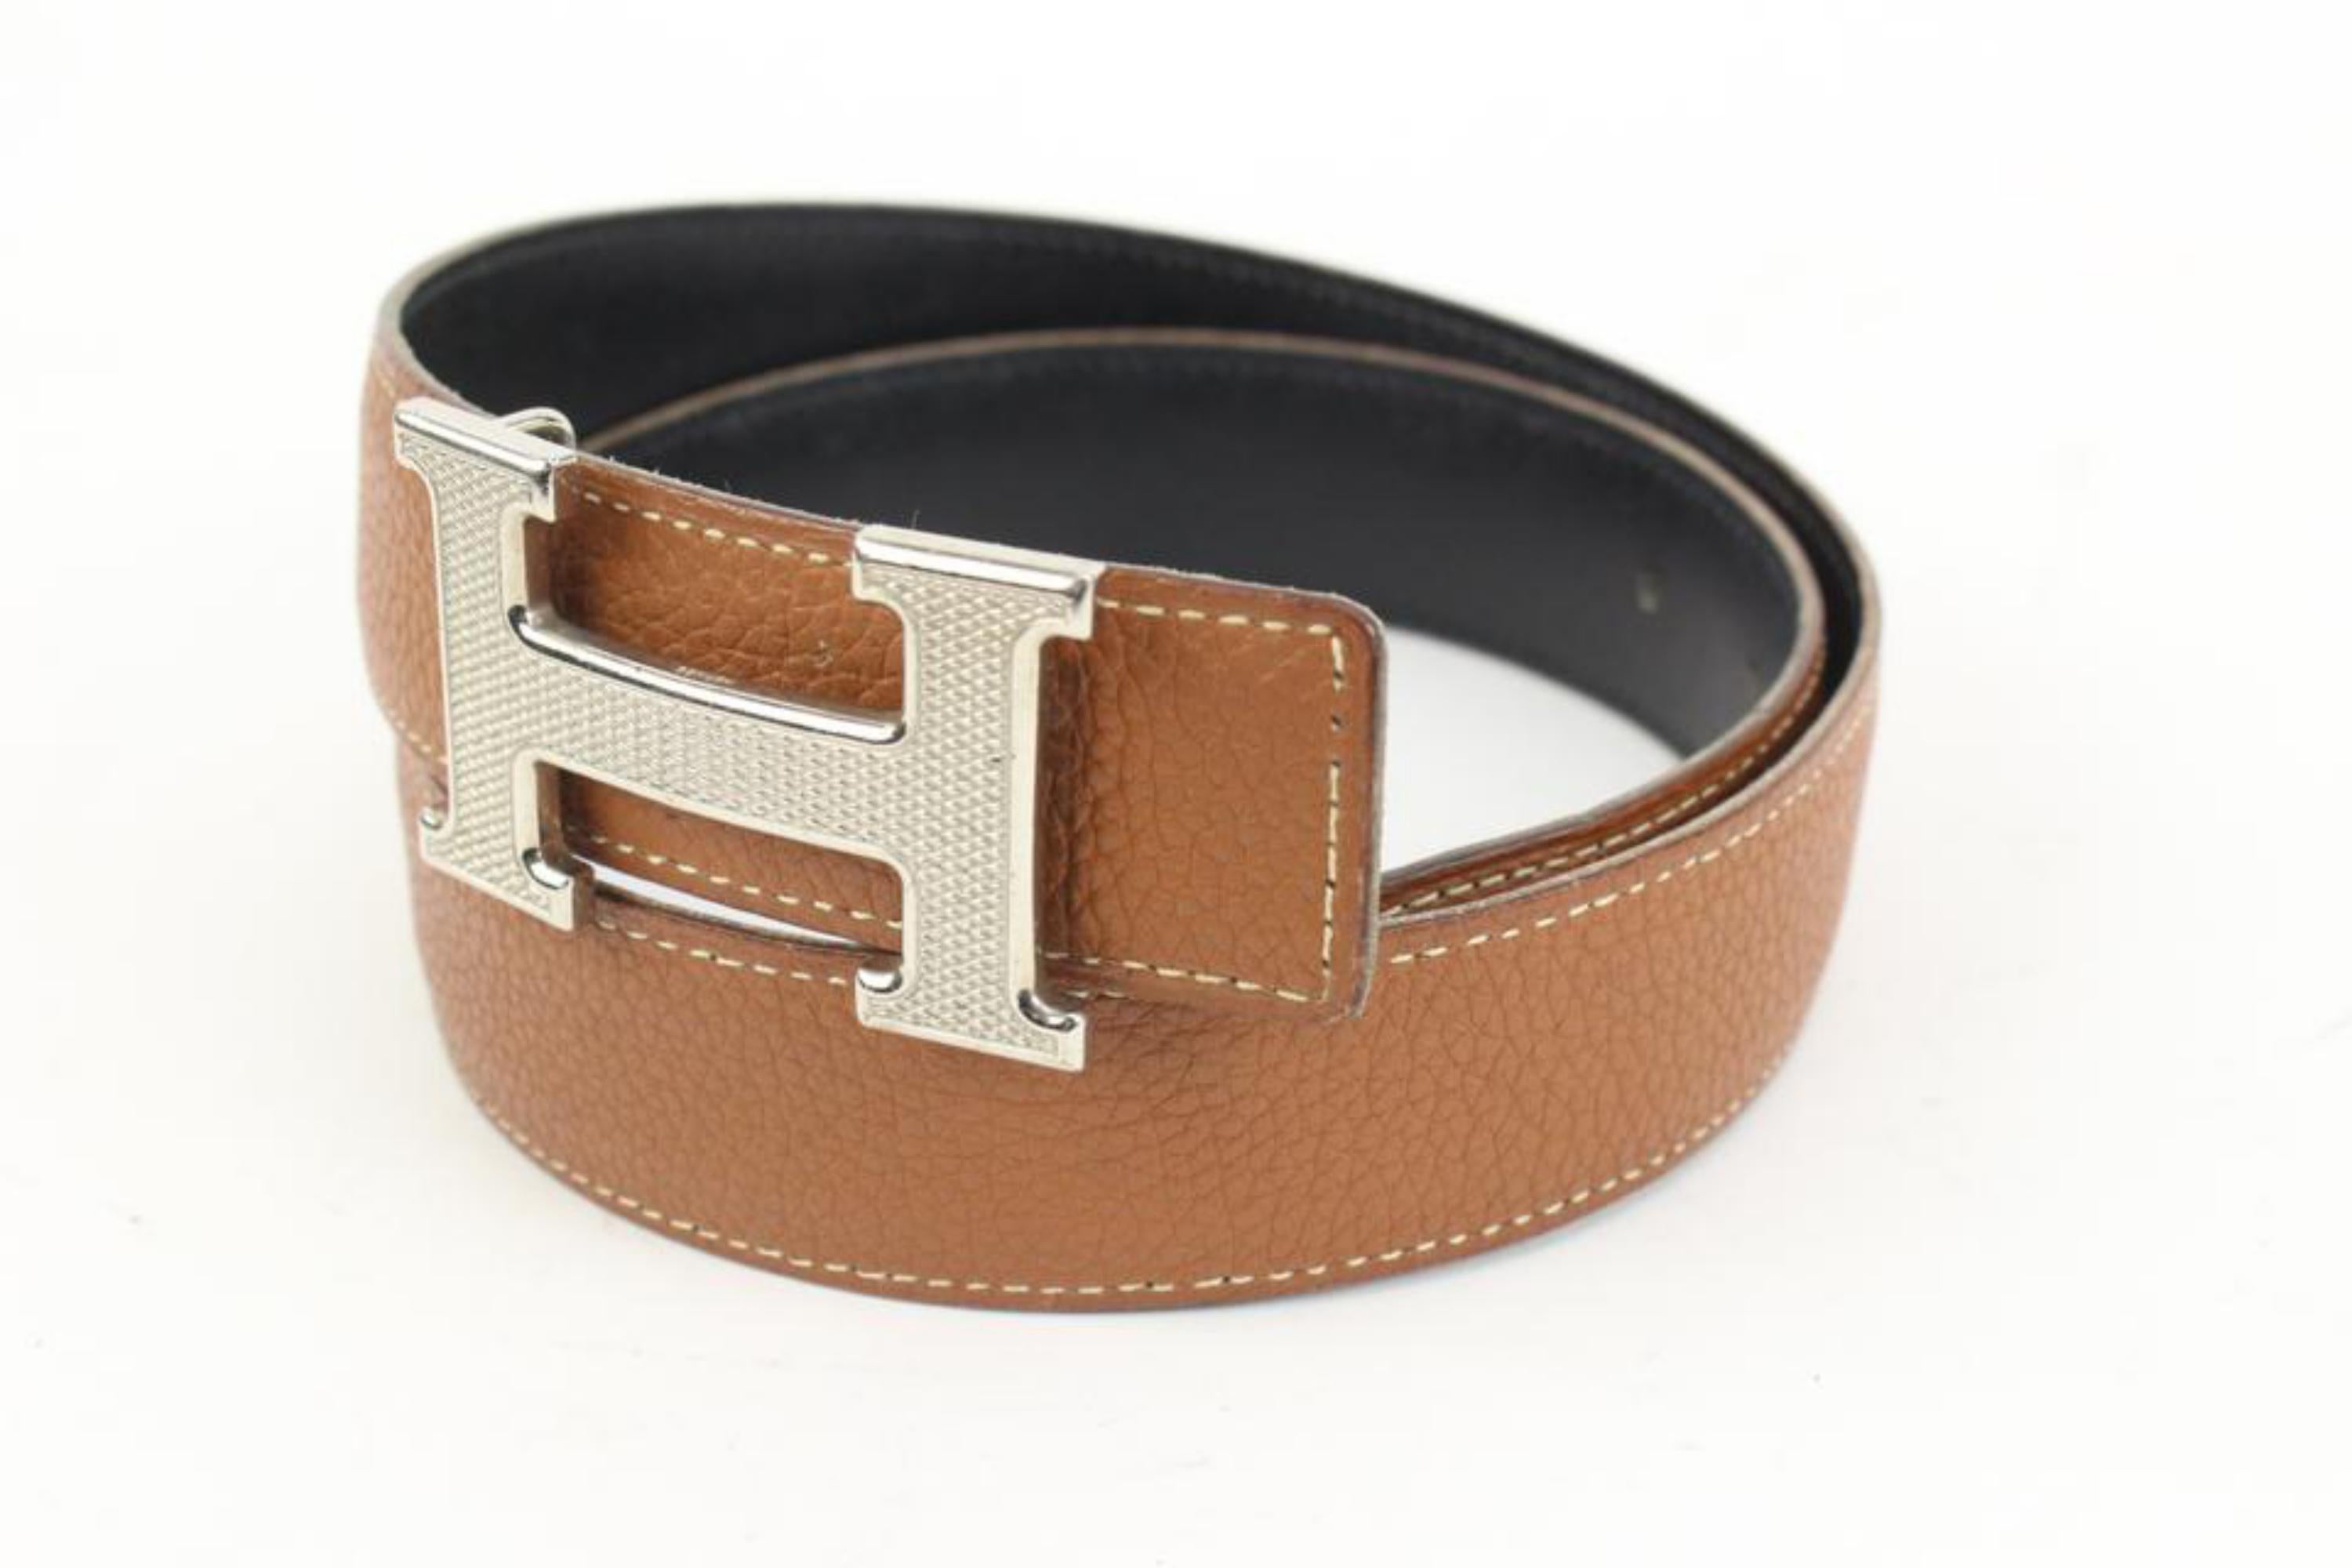 Hermès Black x Brown 32mm Reversible Guilloche H Logo Belt Kit Silver 7h318s
Date Code/Serial Number: G in a Square
Made In: France
Measurements: Length:  35.5